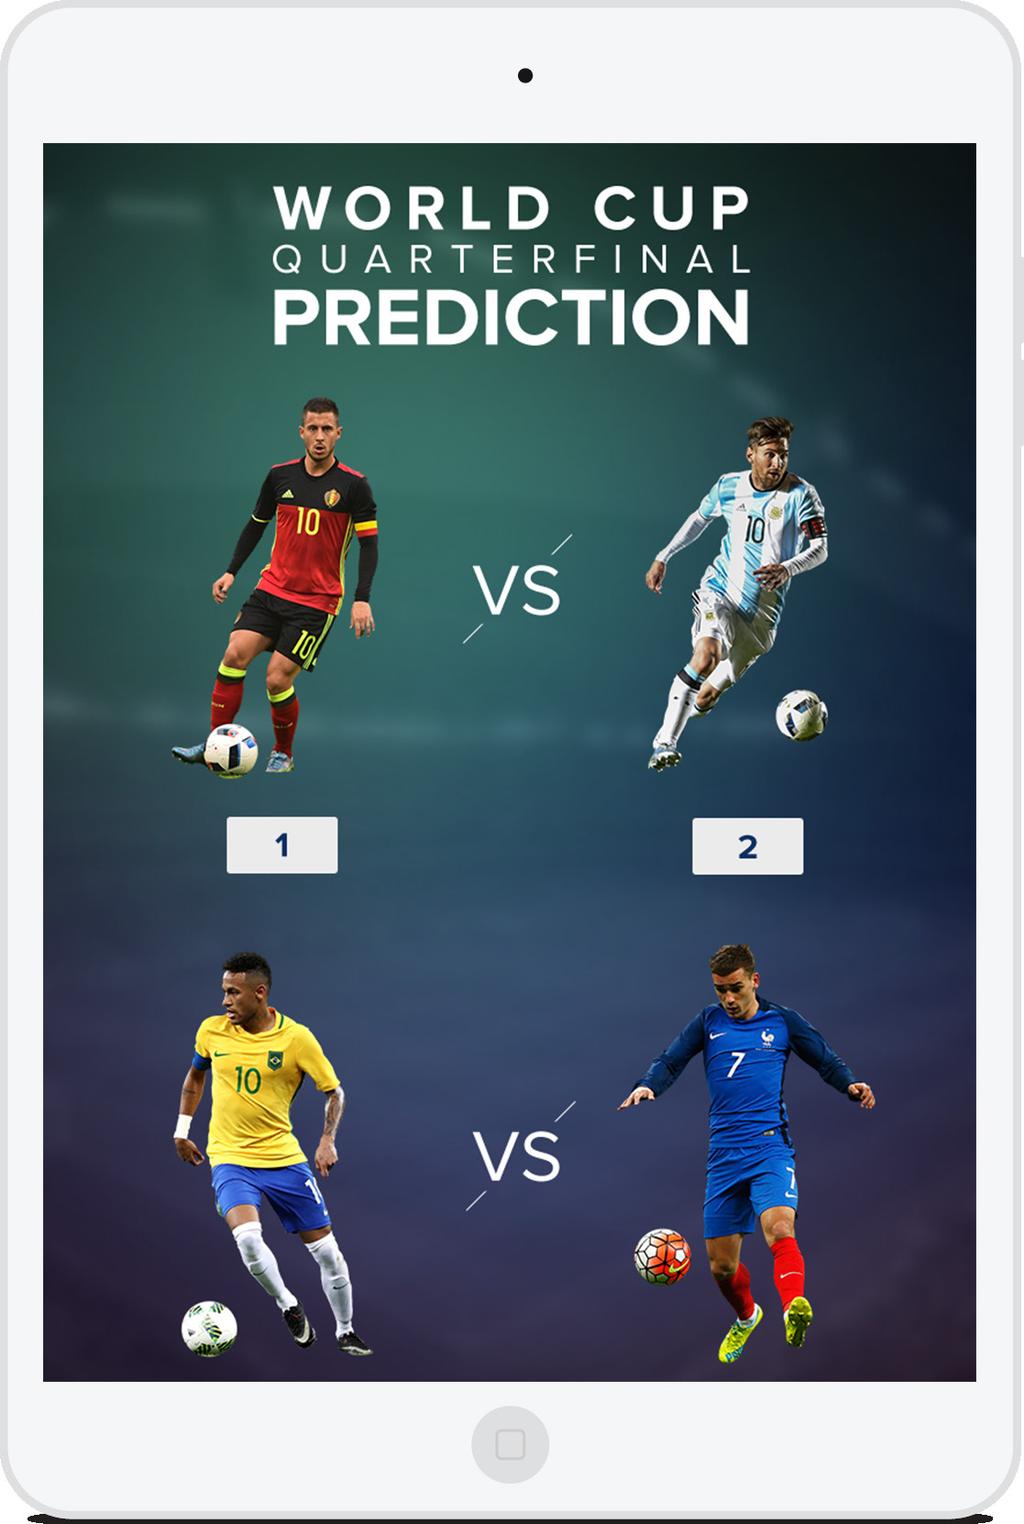 4. Your personal prediction Participants predict the final score of one or more game(s). They can then share their prediction with their friends on social media.